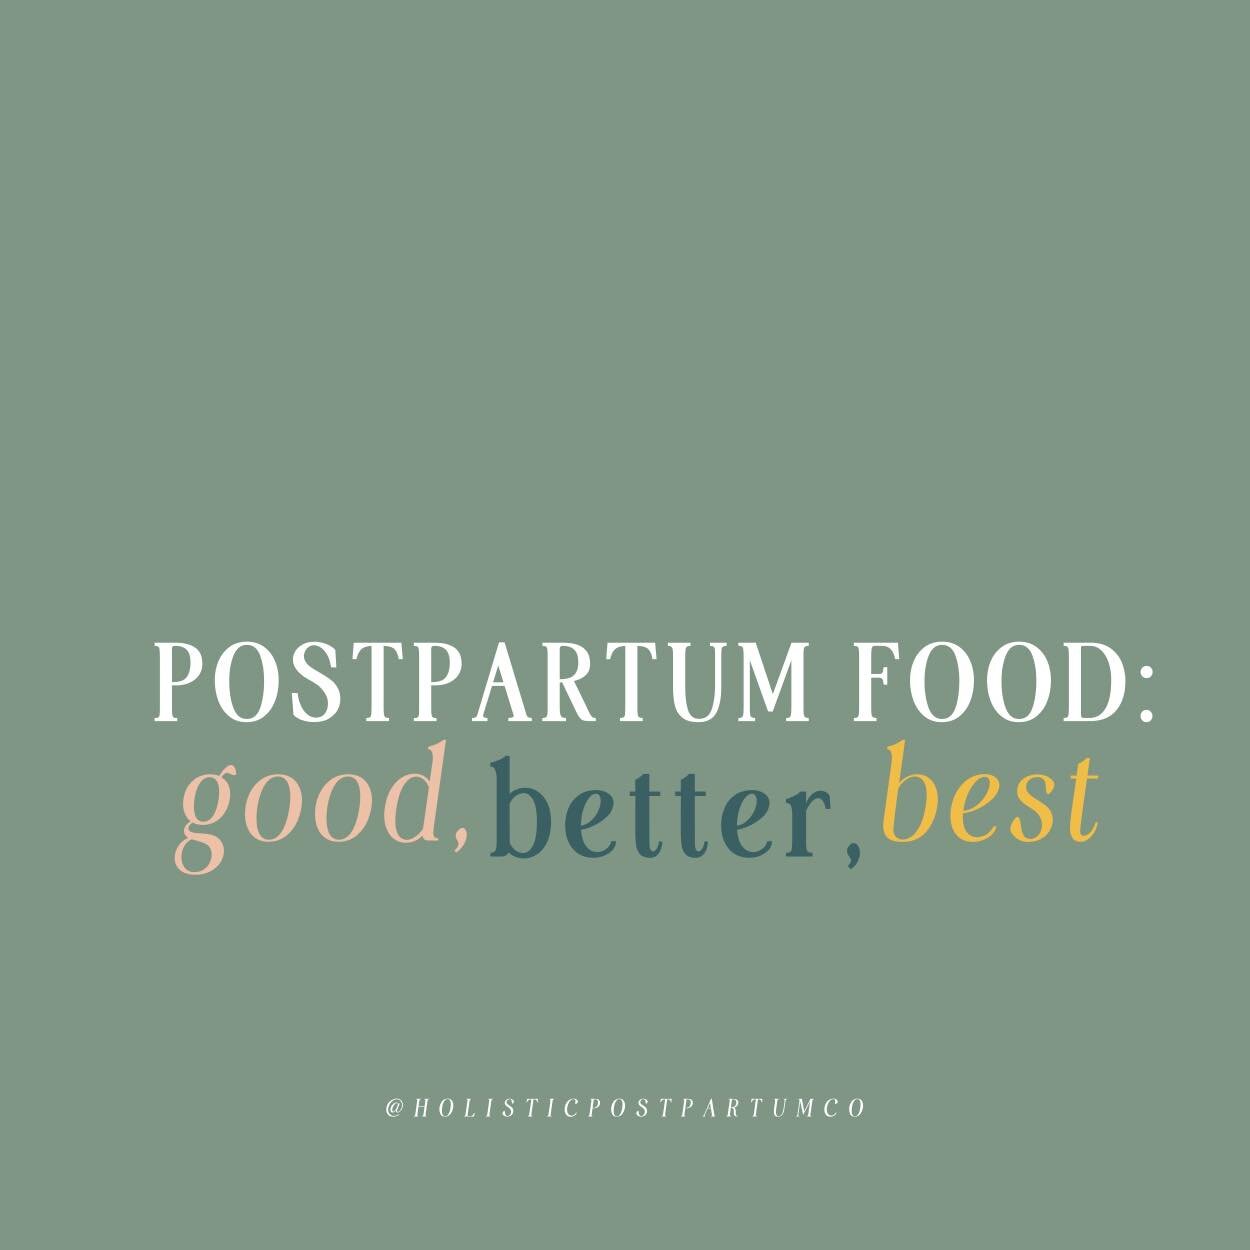 The quality of our food matters ❕&hellip;

&zwnj;

Especially in the postpartum time.

&zwnj;

The best foods and beverages you can eat following birth are freshly cooked, warm, and easy to digest. Even better if they are properly spiced, delicious, 